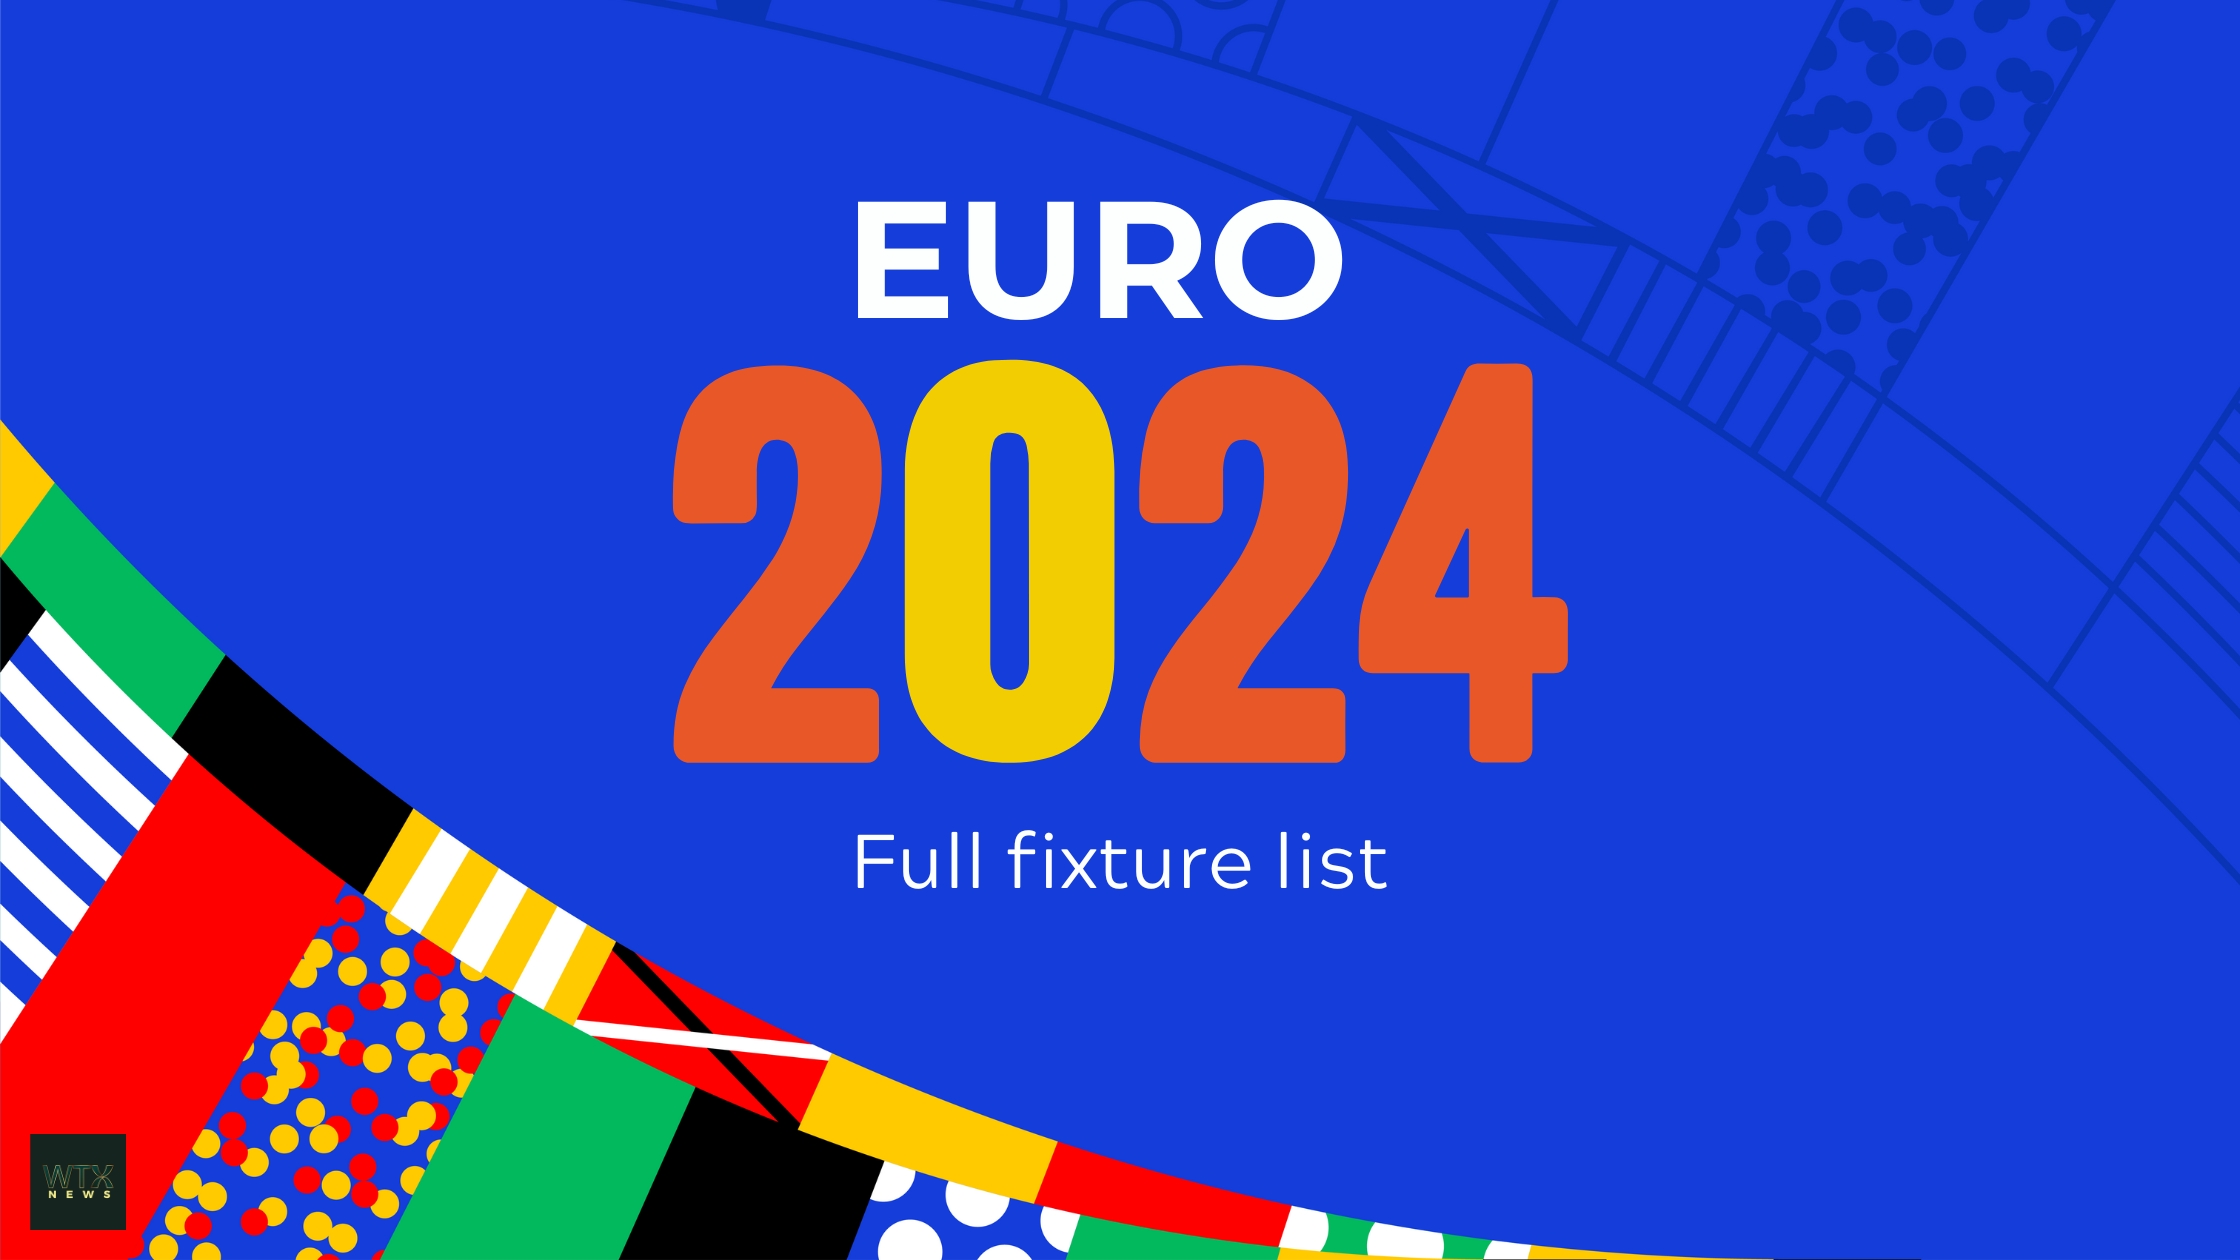 When does EURO 2024 start? the full fixture list